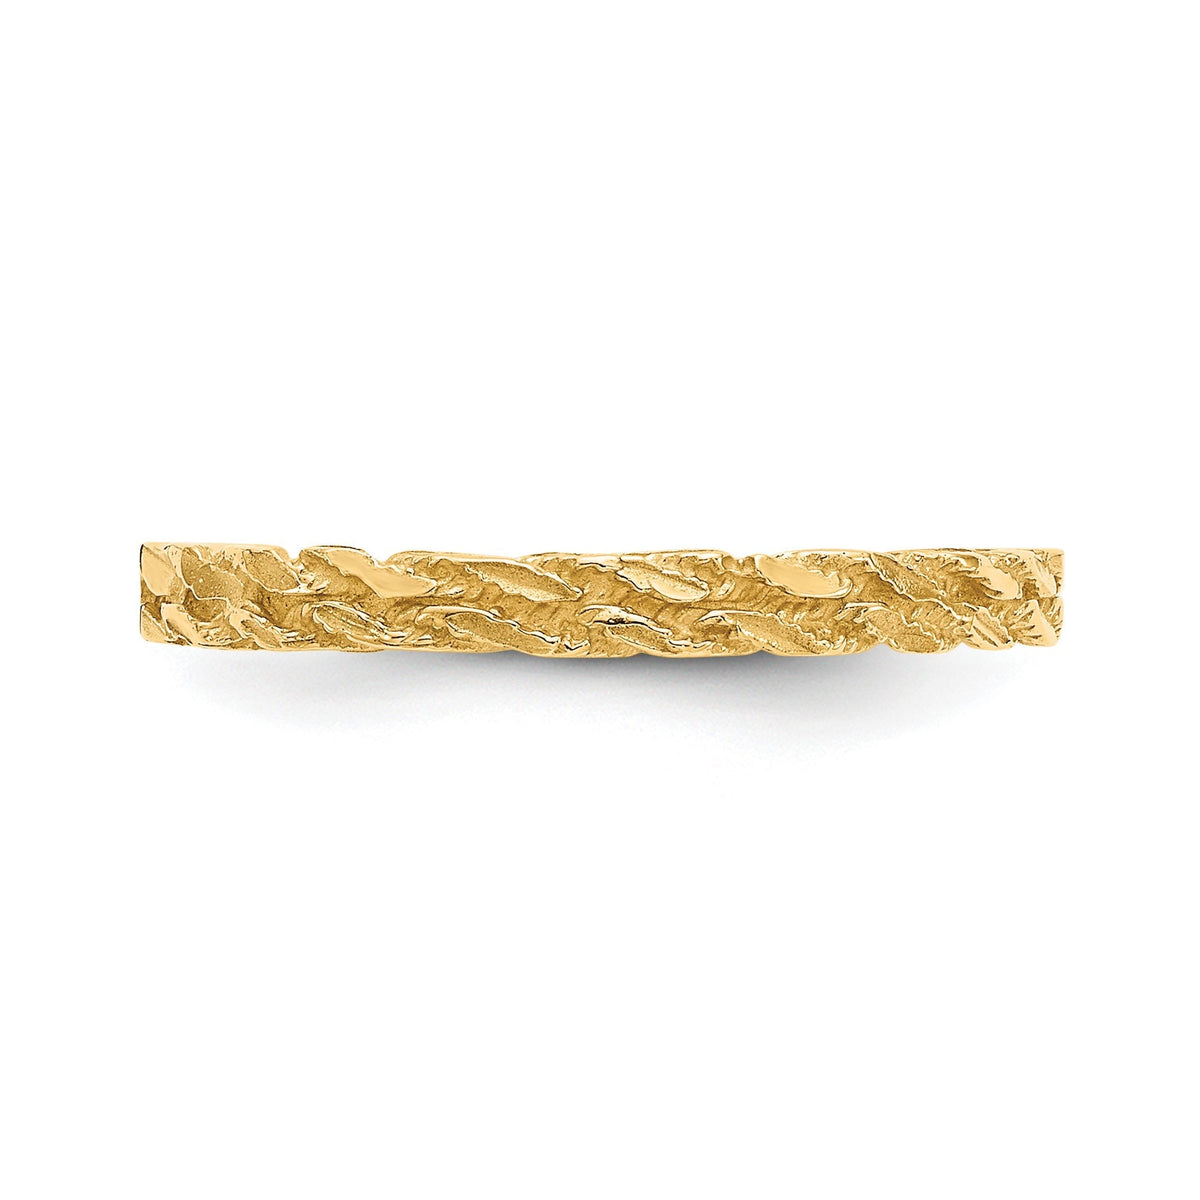 14k Yellow Gold Diamond-cut Textured Rope Band Ring 3mm- Made in USA - Gift Box Included - Size 4.75-8.75  Engraveable Ring